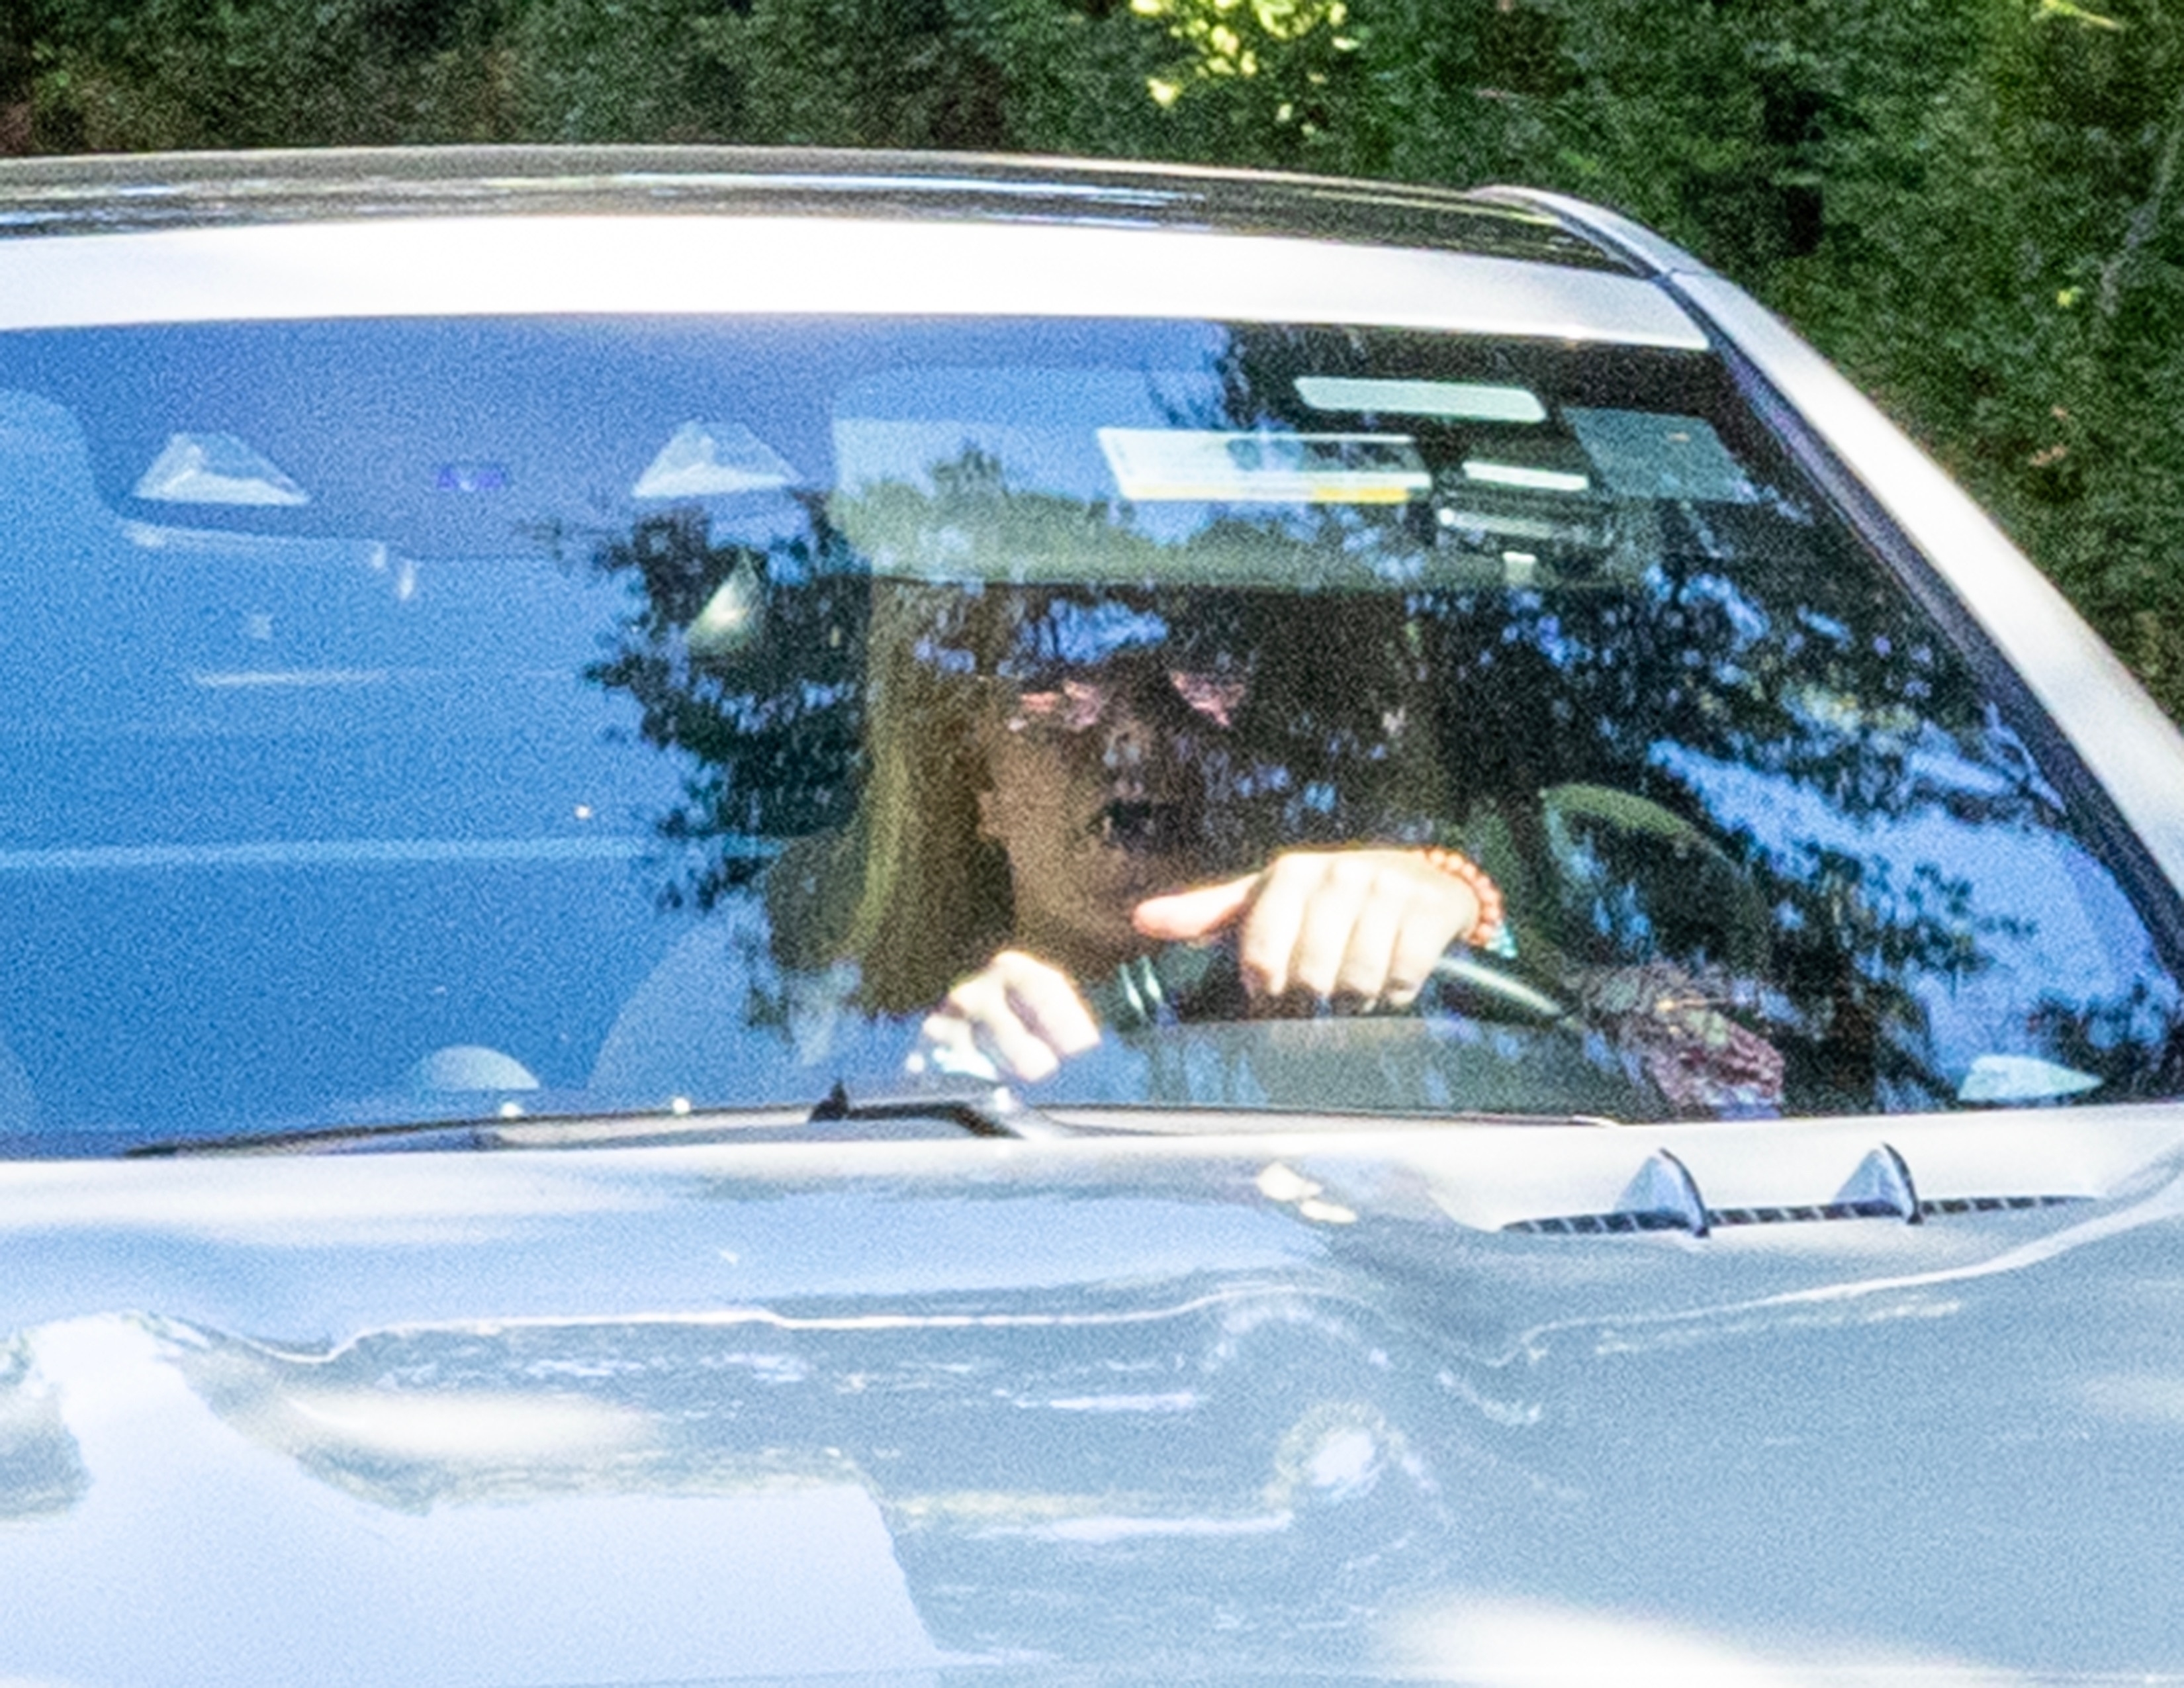 Close-up of Britney driving, with her hands visible